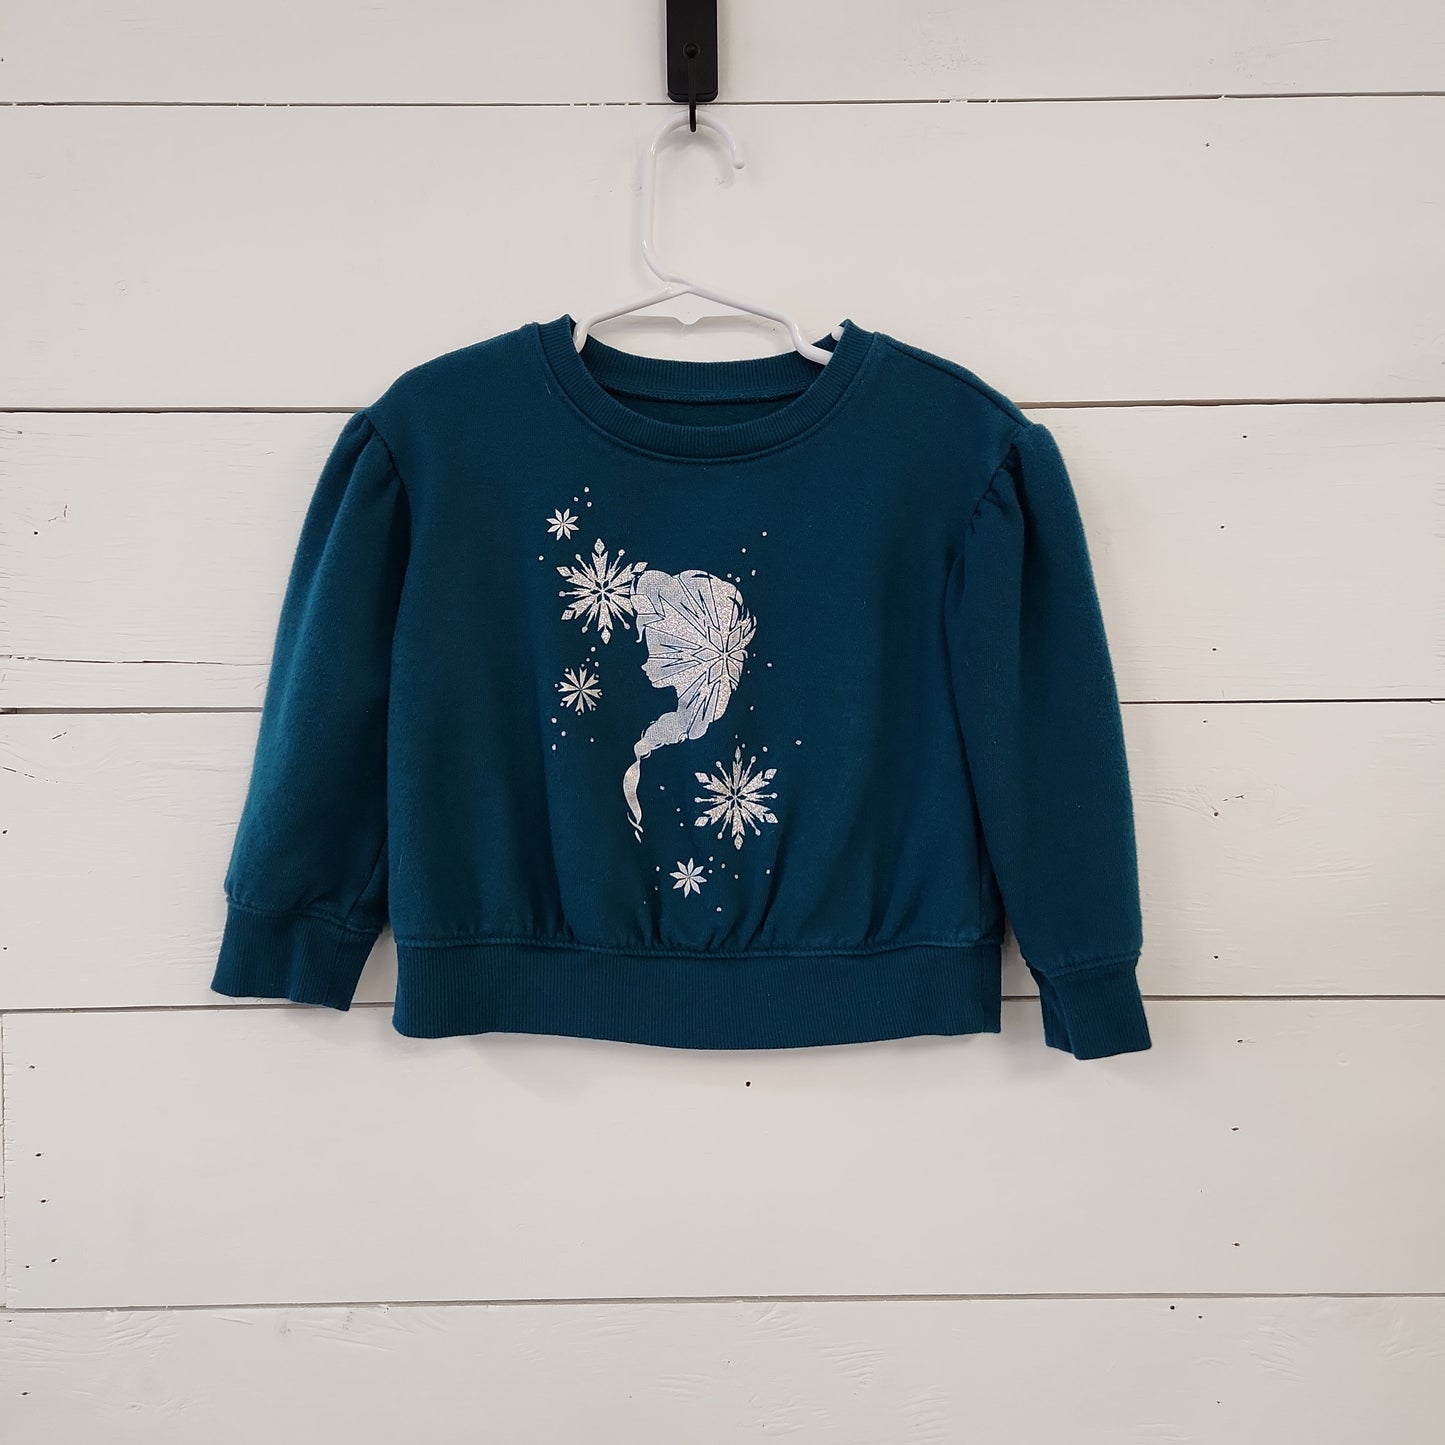 Size 3t | Jumping Beans Sweatshirt | Secondhand